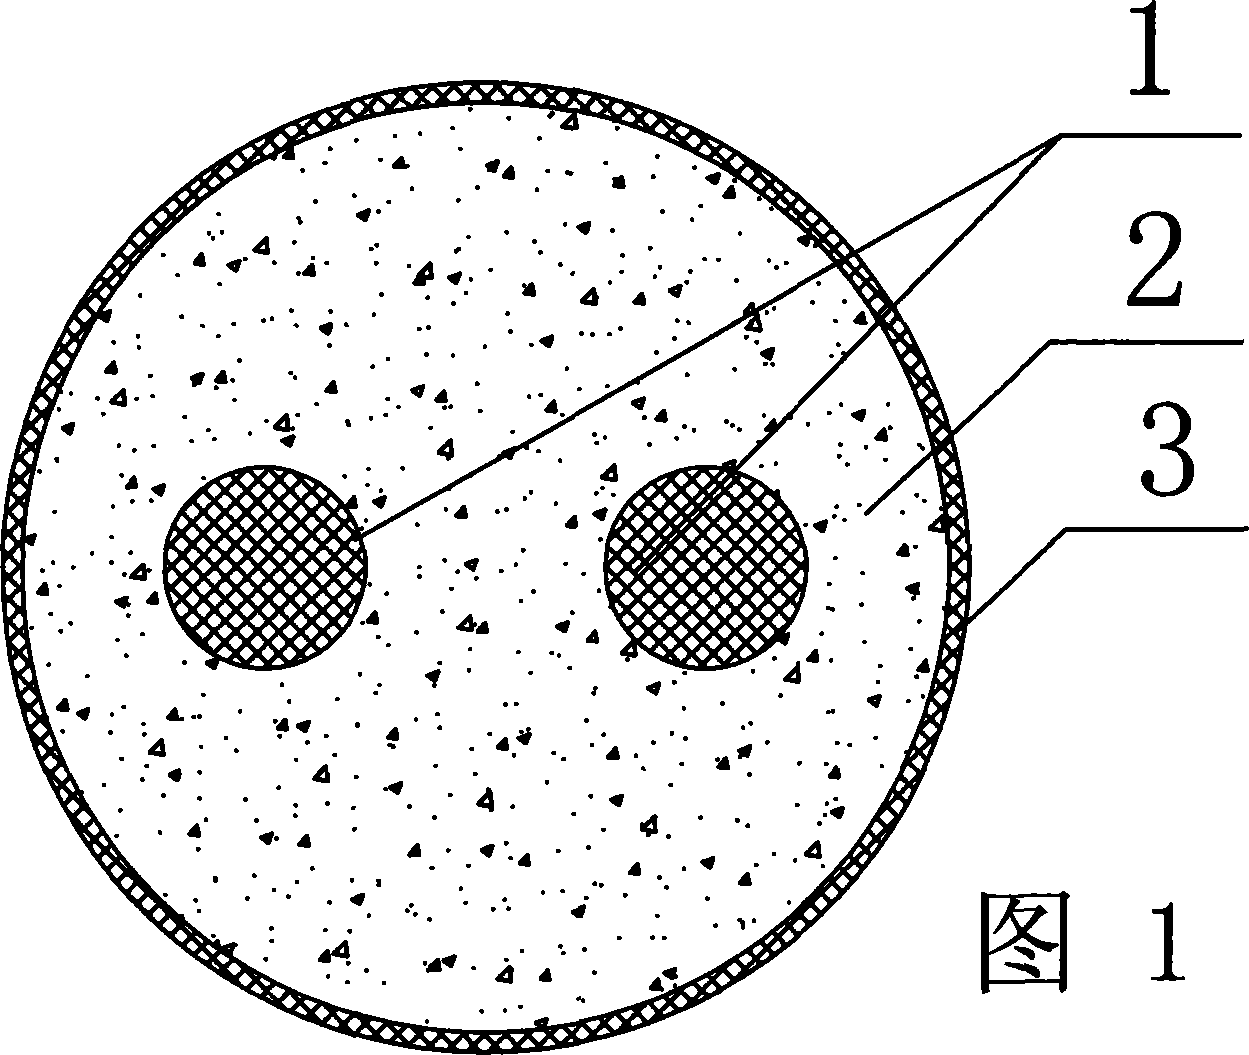 Method for automatically filling mineral insulated electric cable